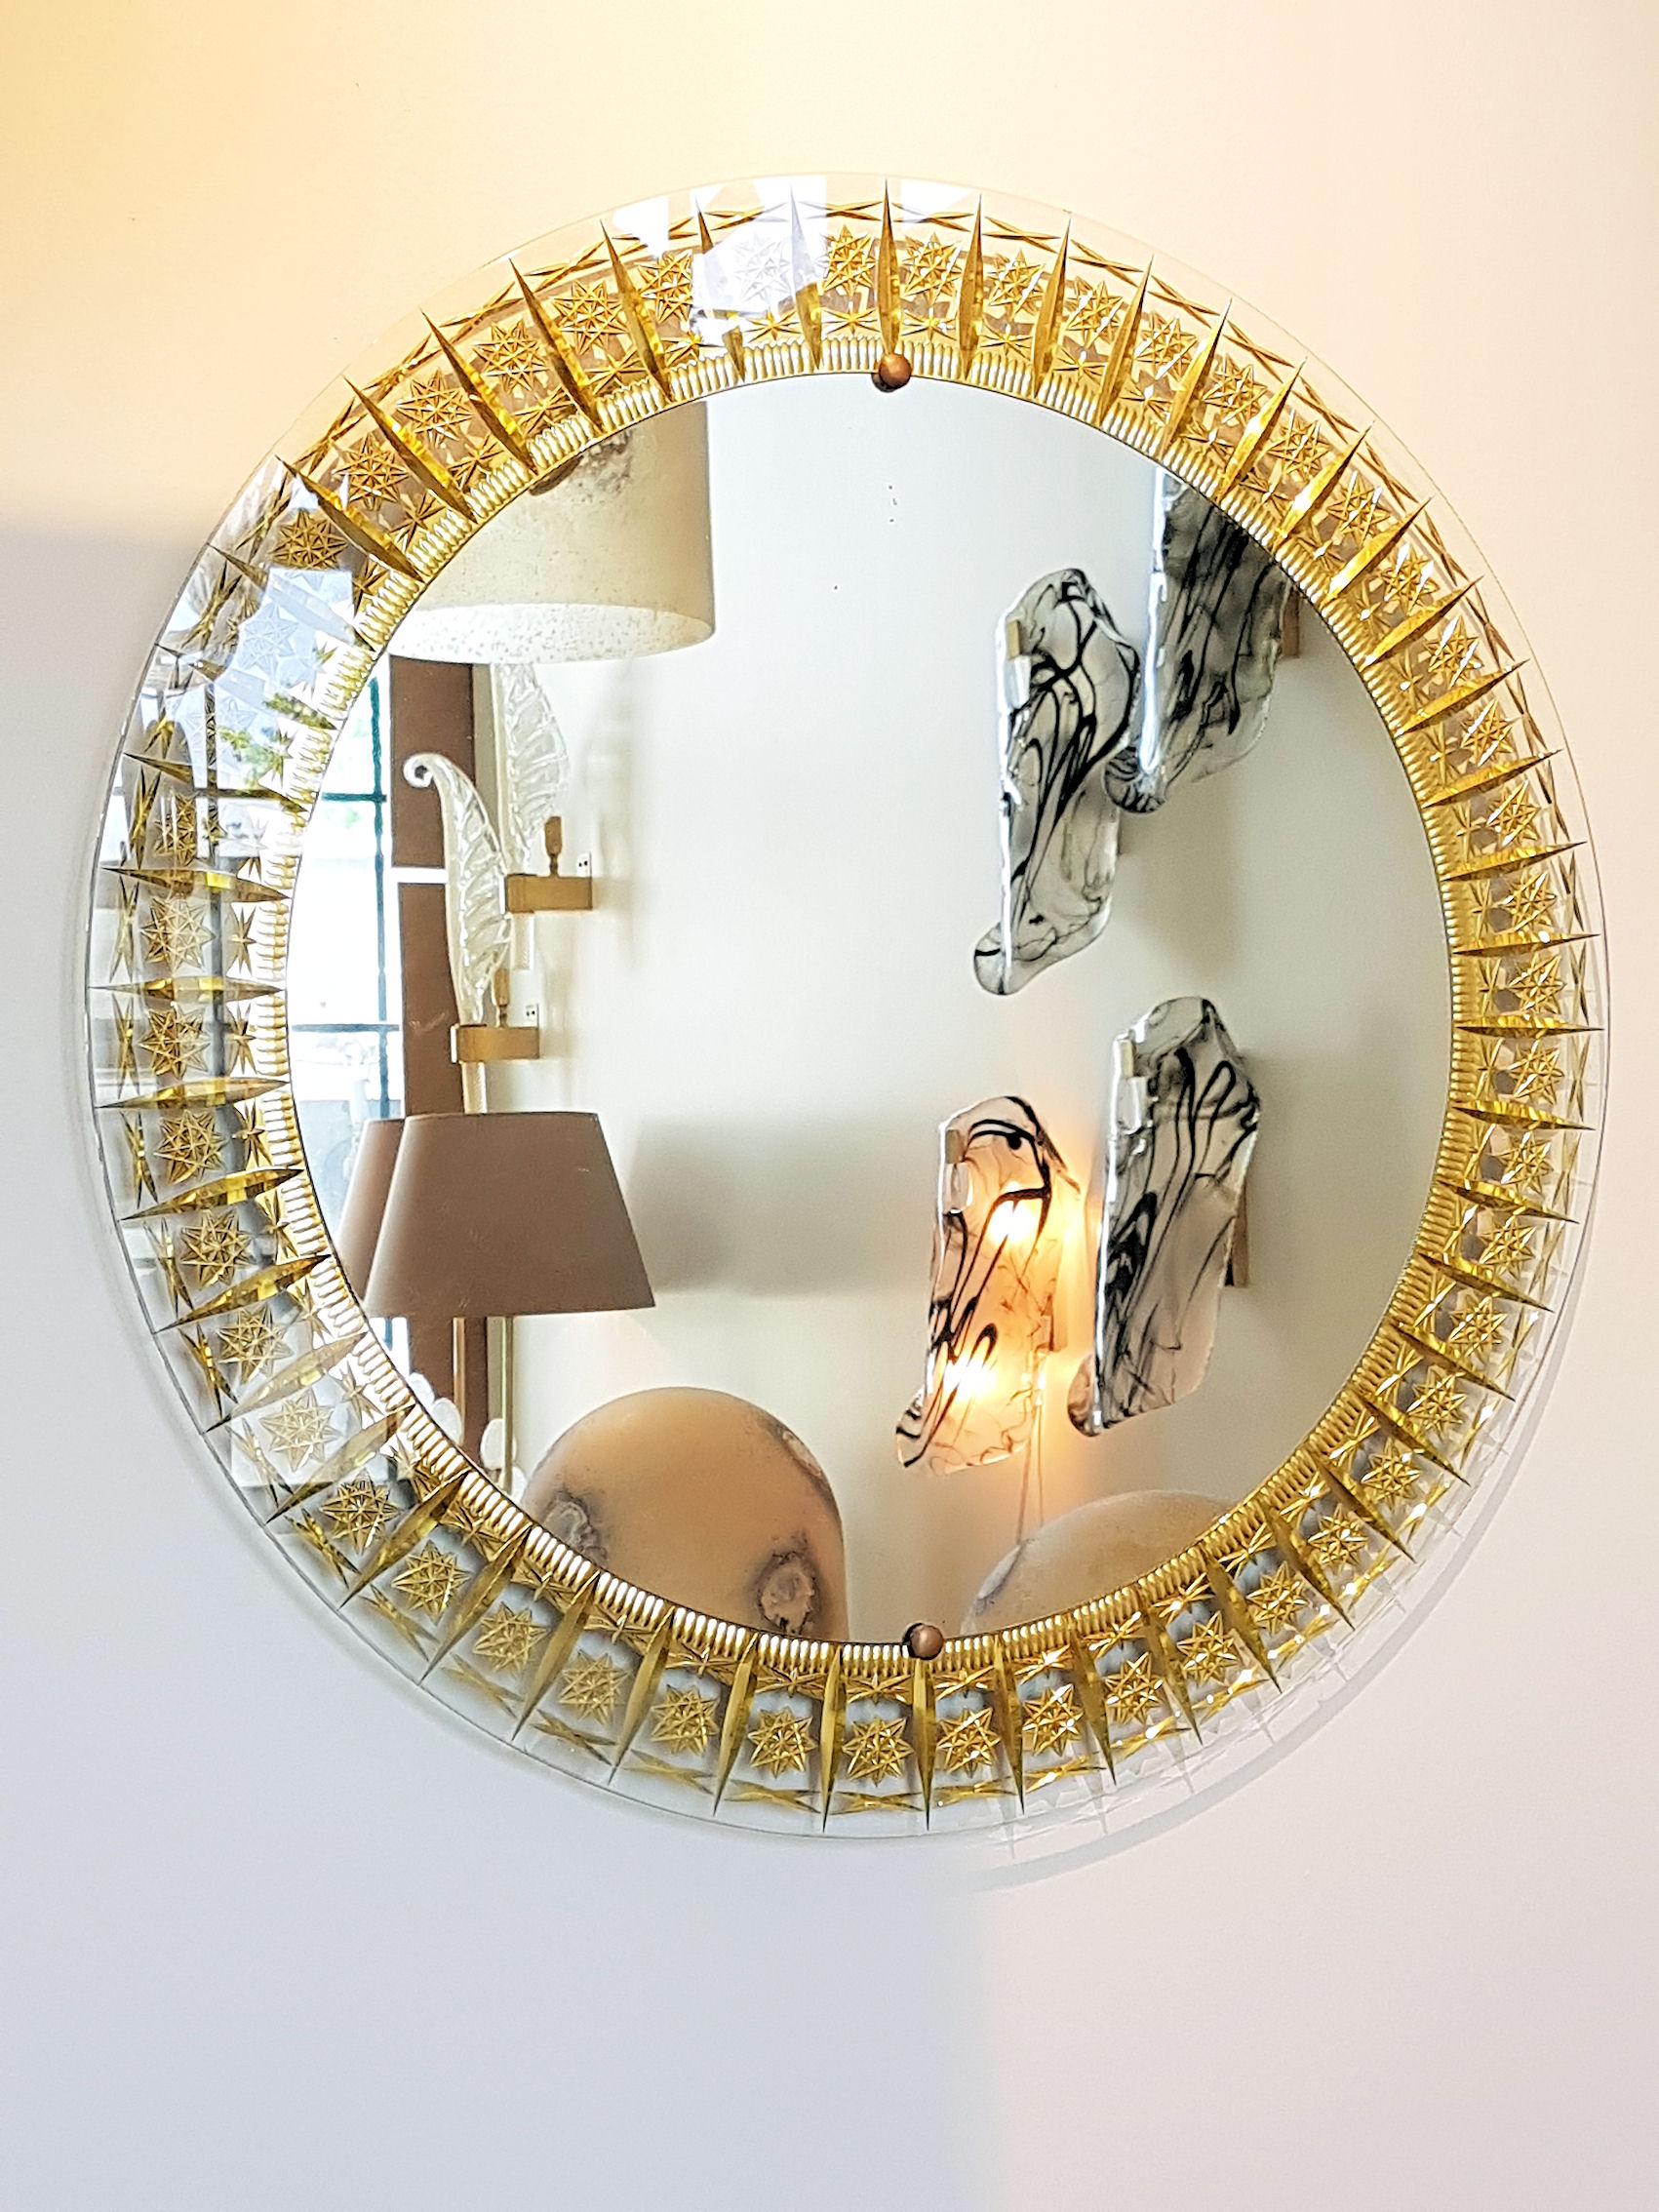 Mid-Century Modern wall mirror, round shape, by Crystal Arte
Italy, 1960s
Frame also in carved glass with gold leaf inclusions.
Mid-Century Modern mirror.
Cristal Arte round gold frame mirror.